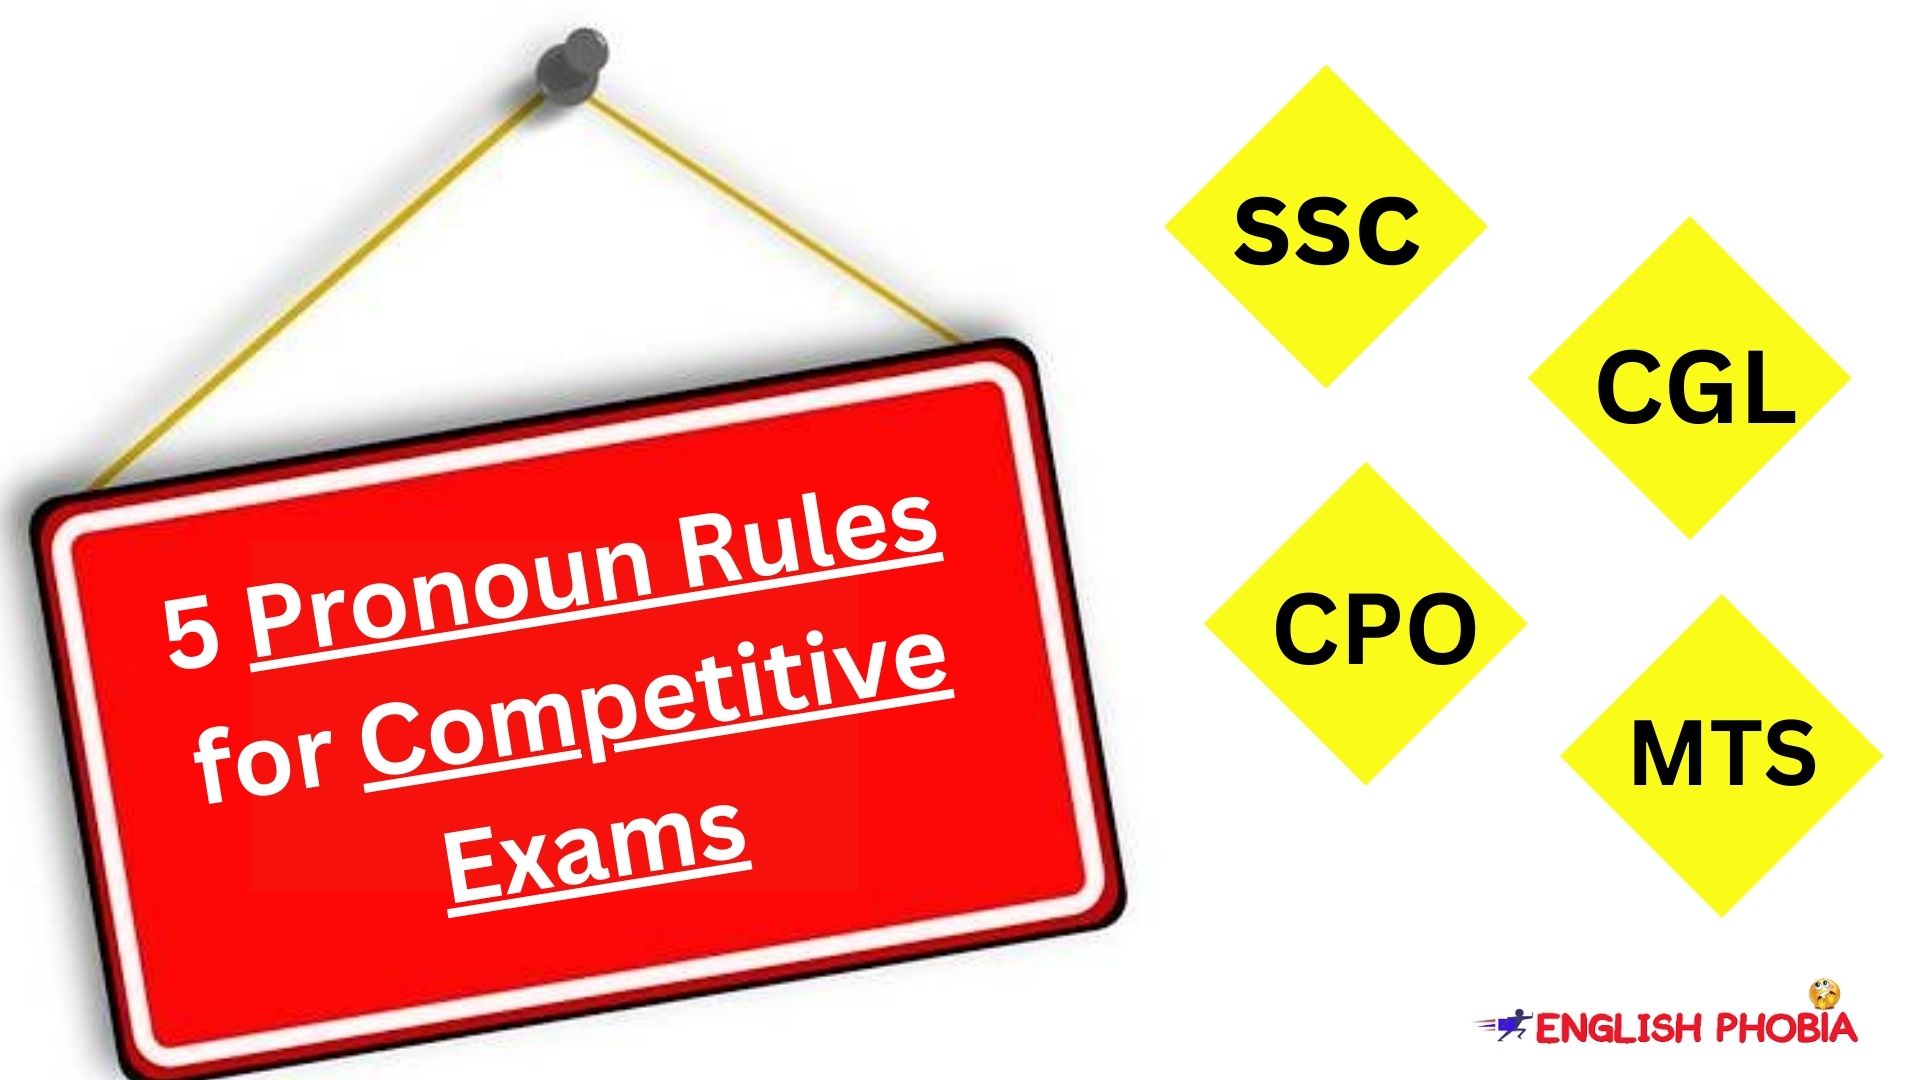 Pronoun Rules for Competitive Exams